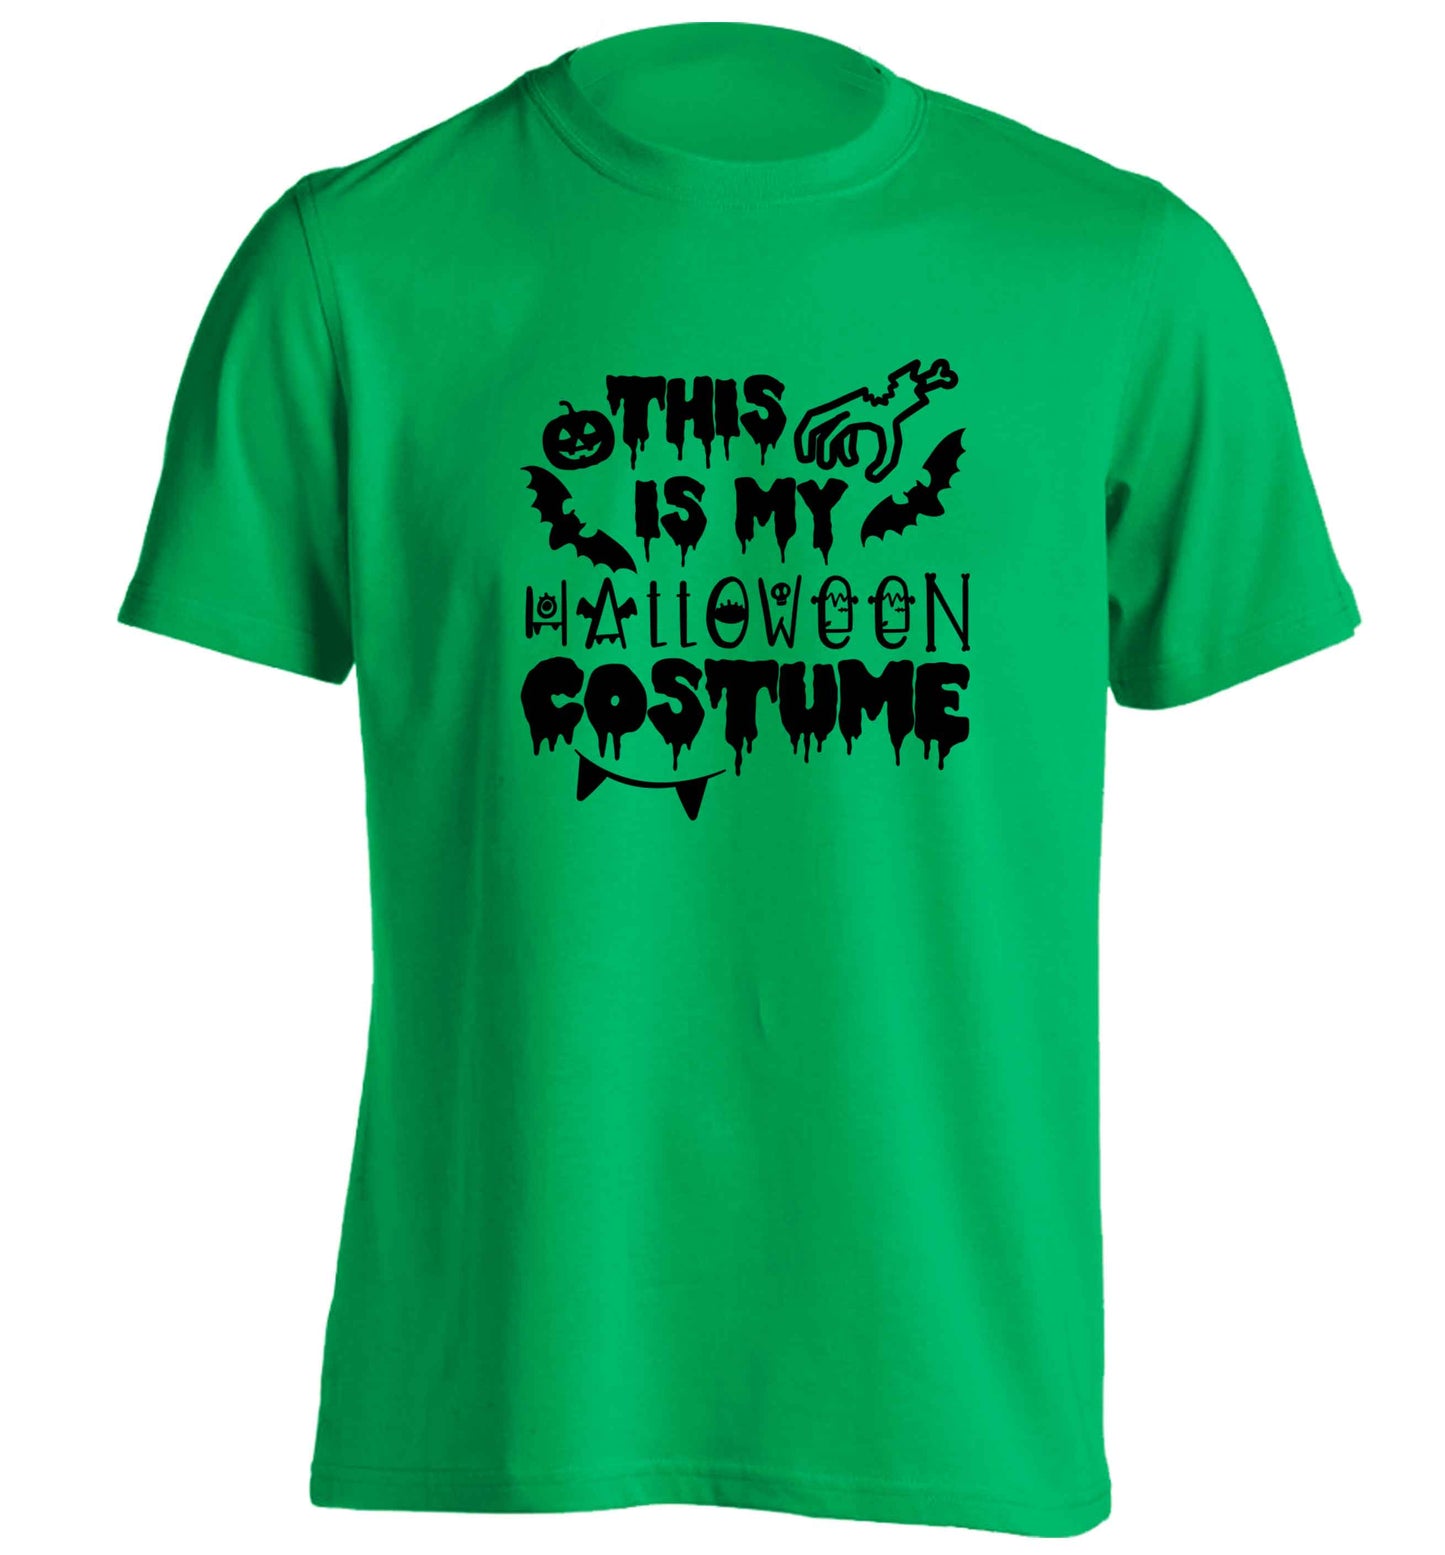 This is my halloween costume adults unisex green Tshirt 2XL